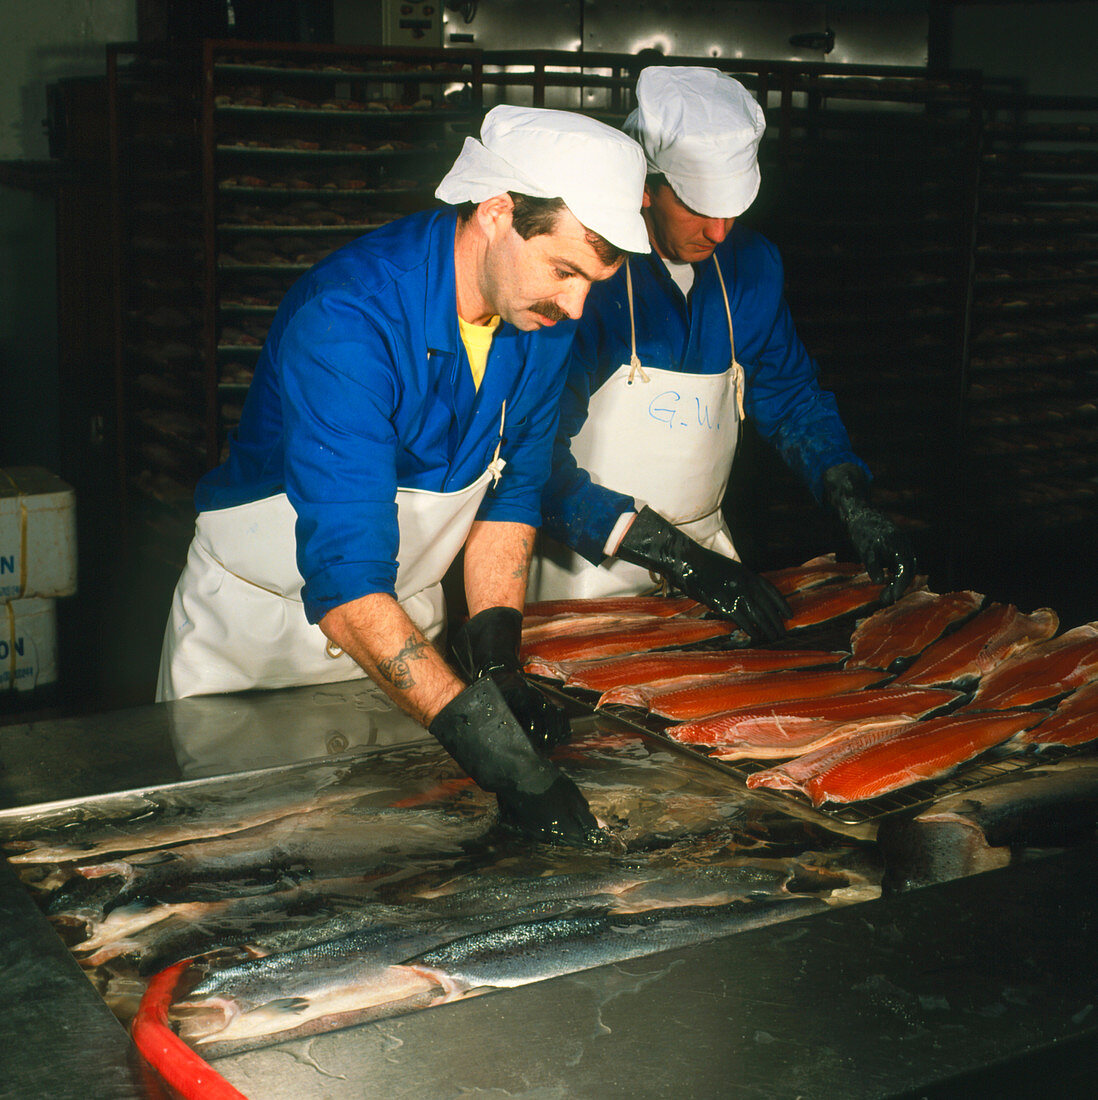 Workers at a salmon smokery,Scotland